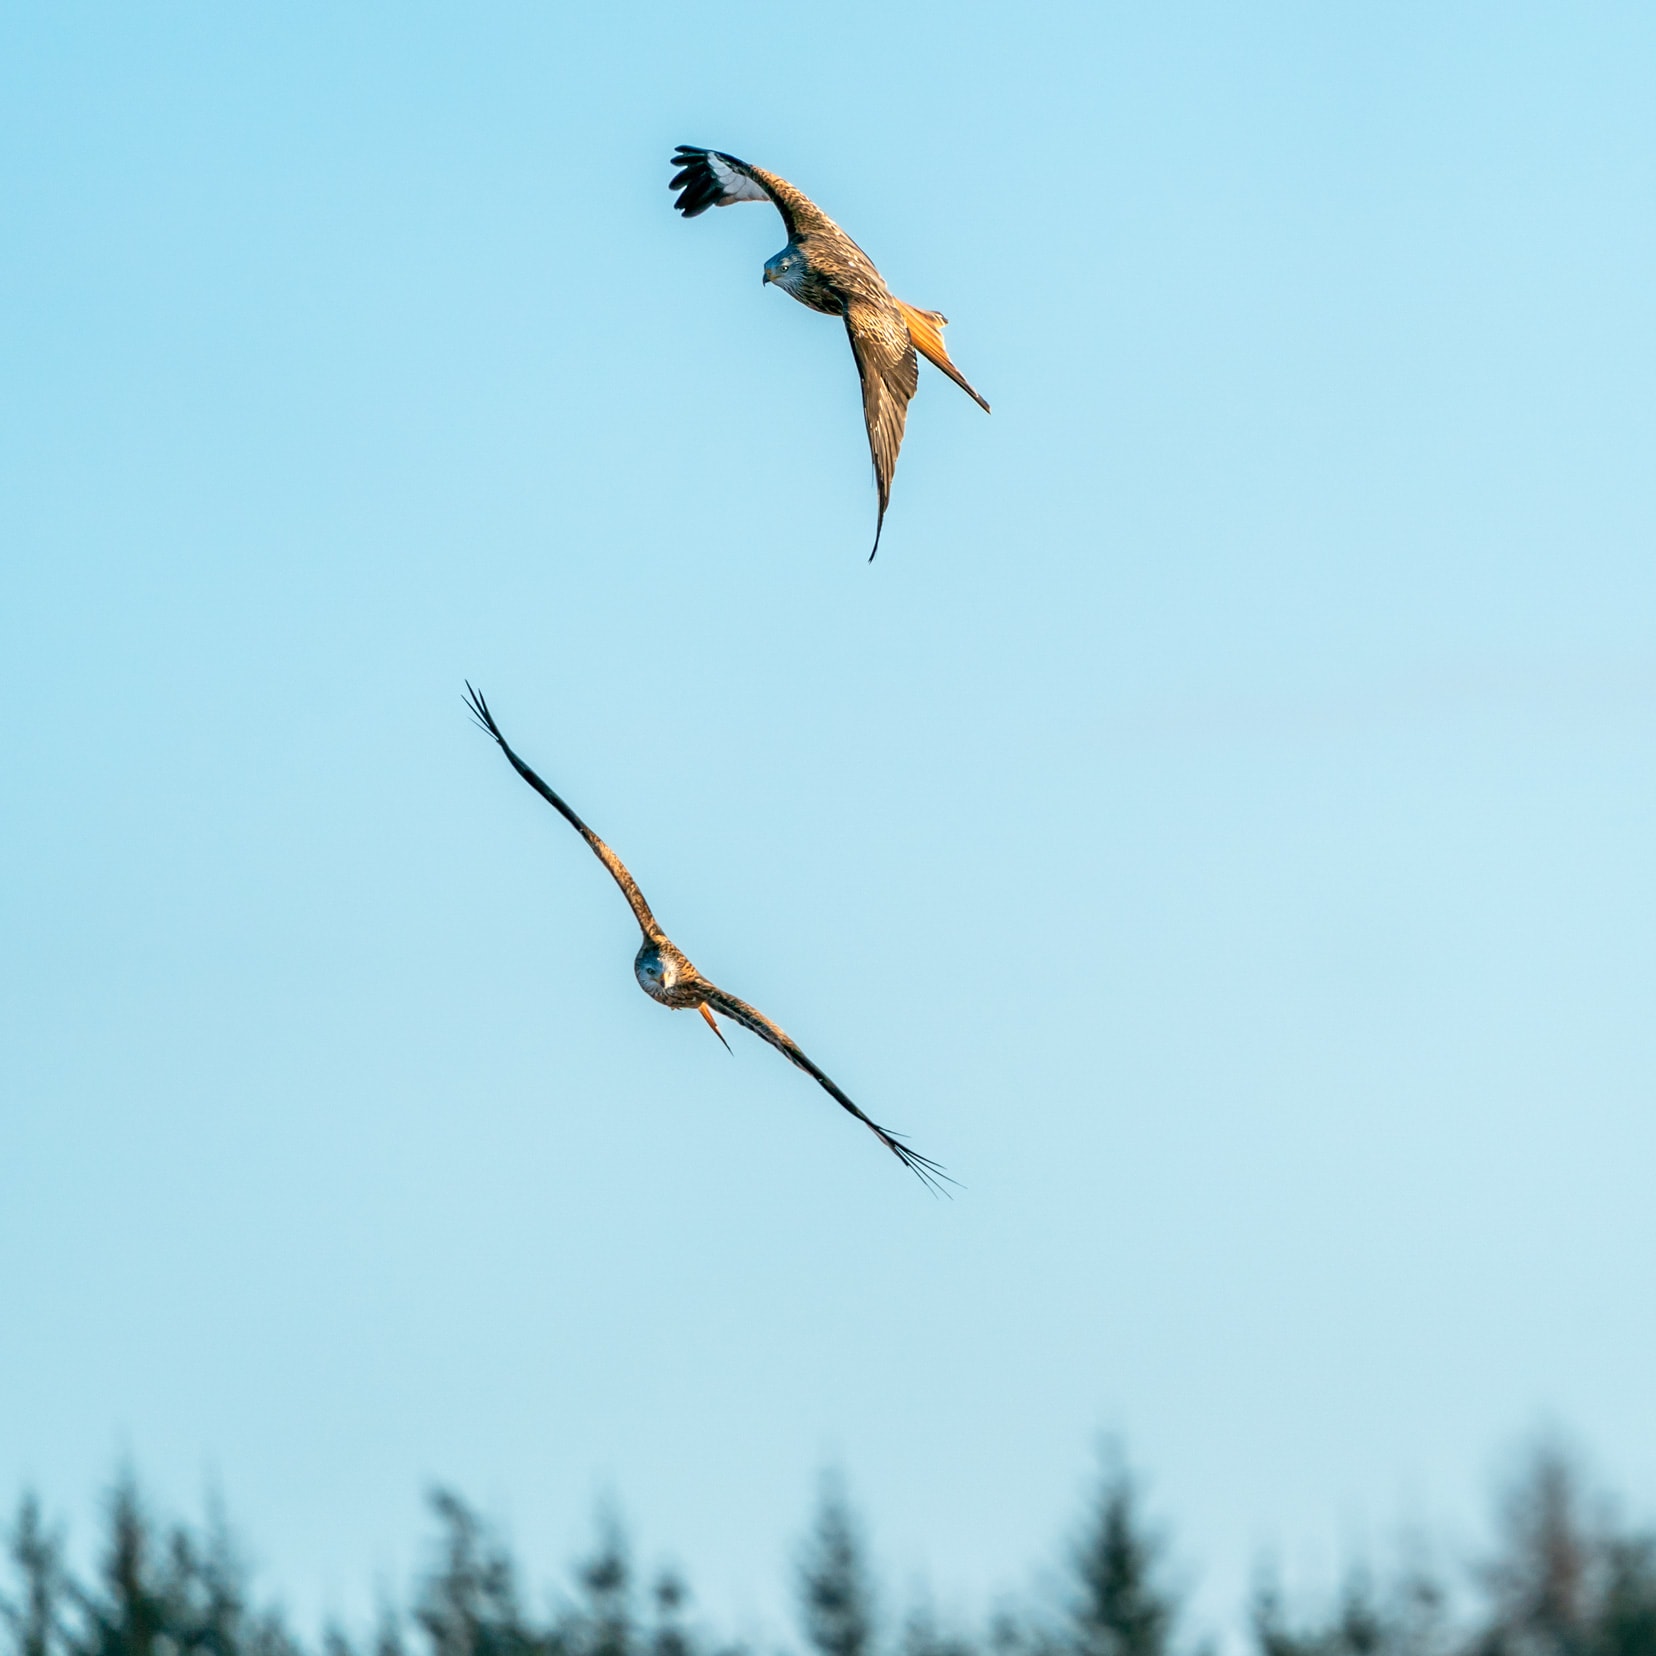 two-Tolly-Red-Kites-banking in the blue sky